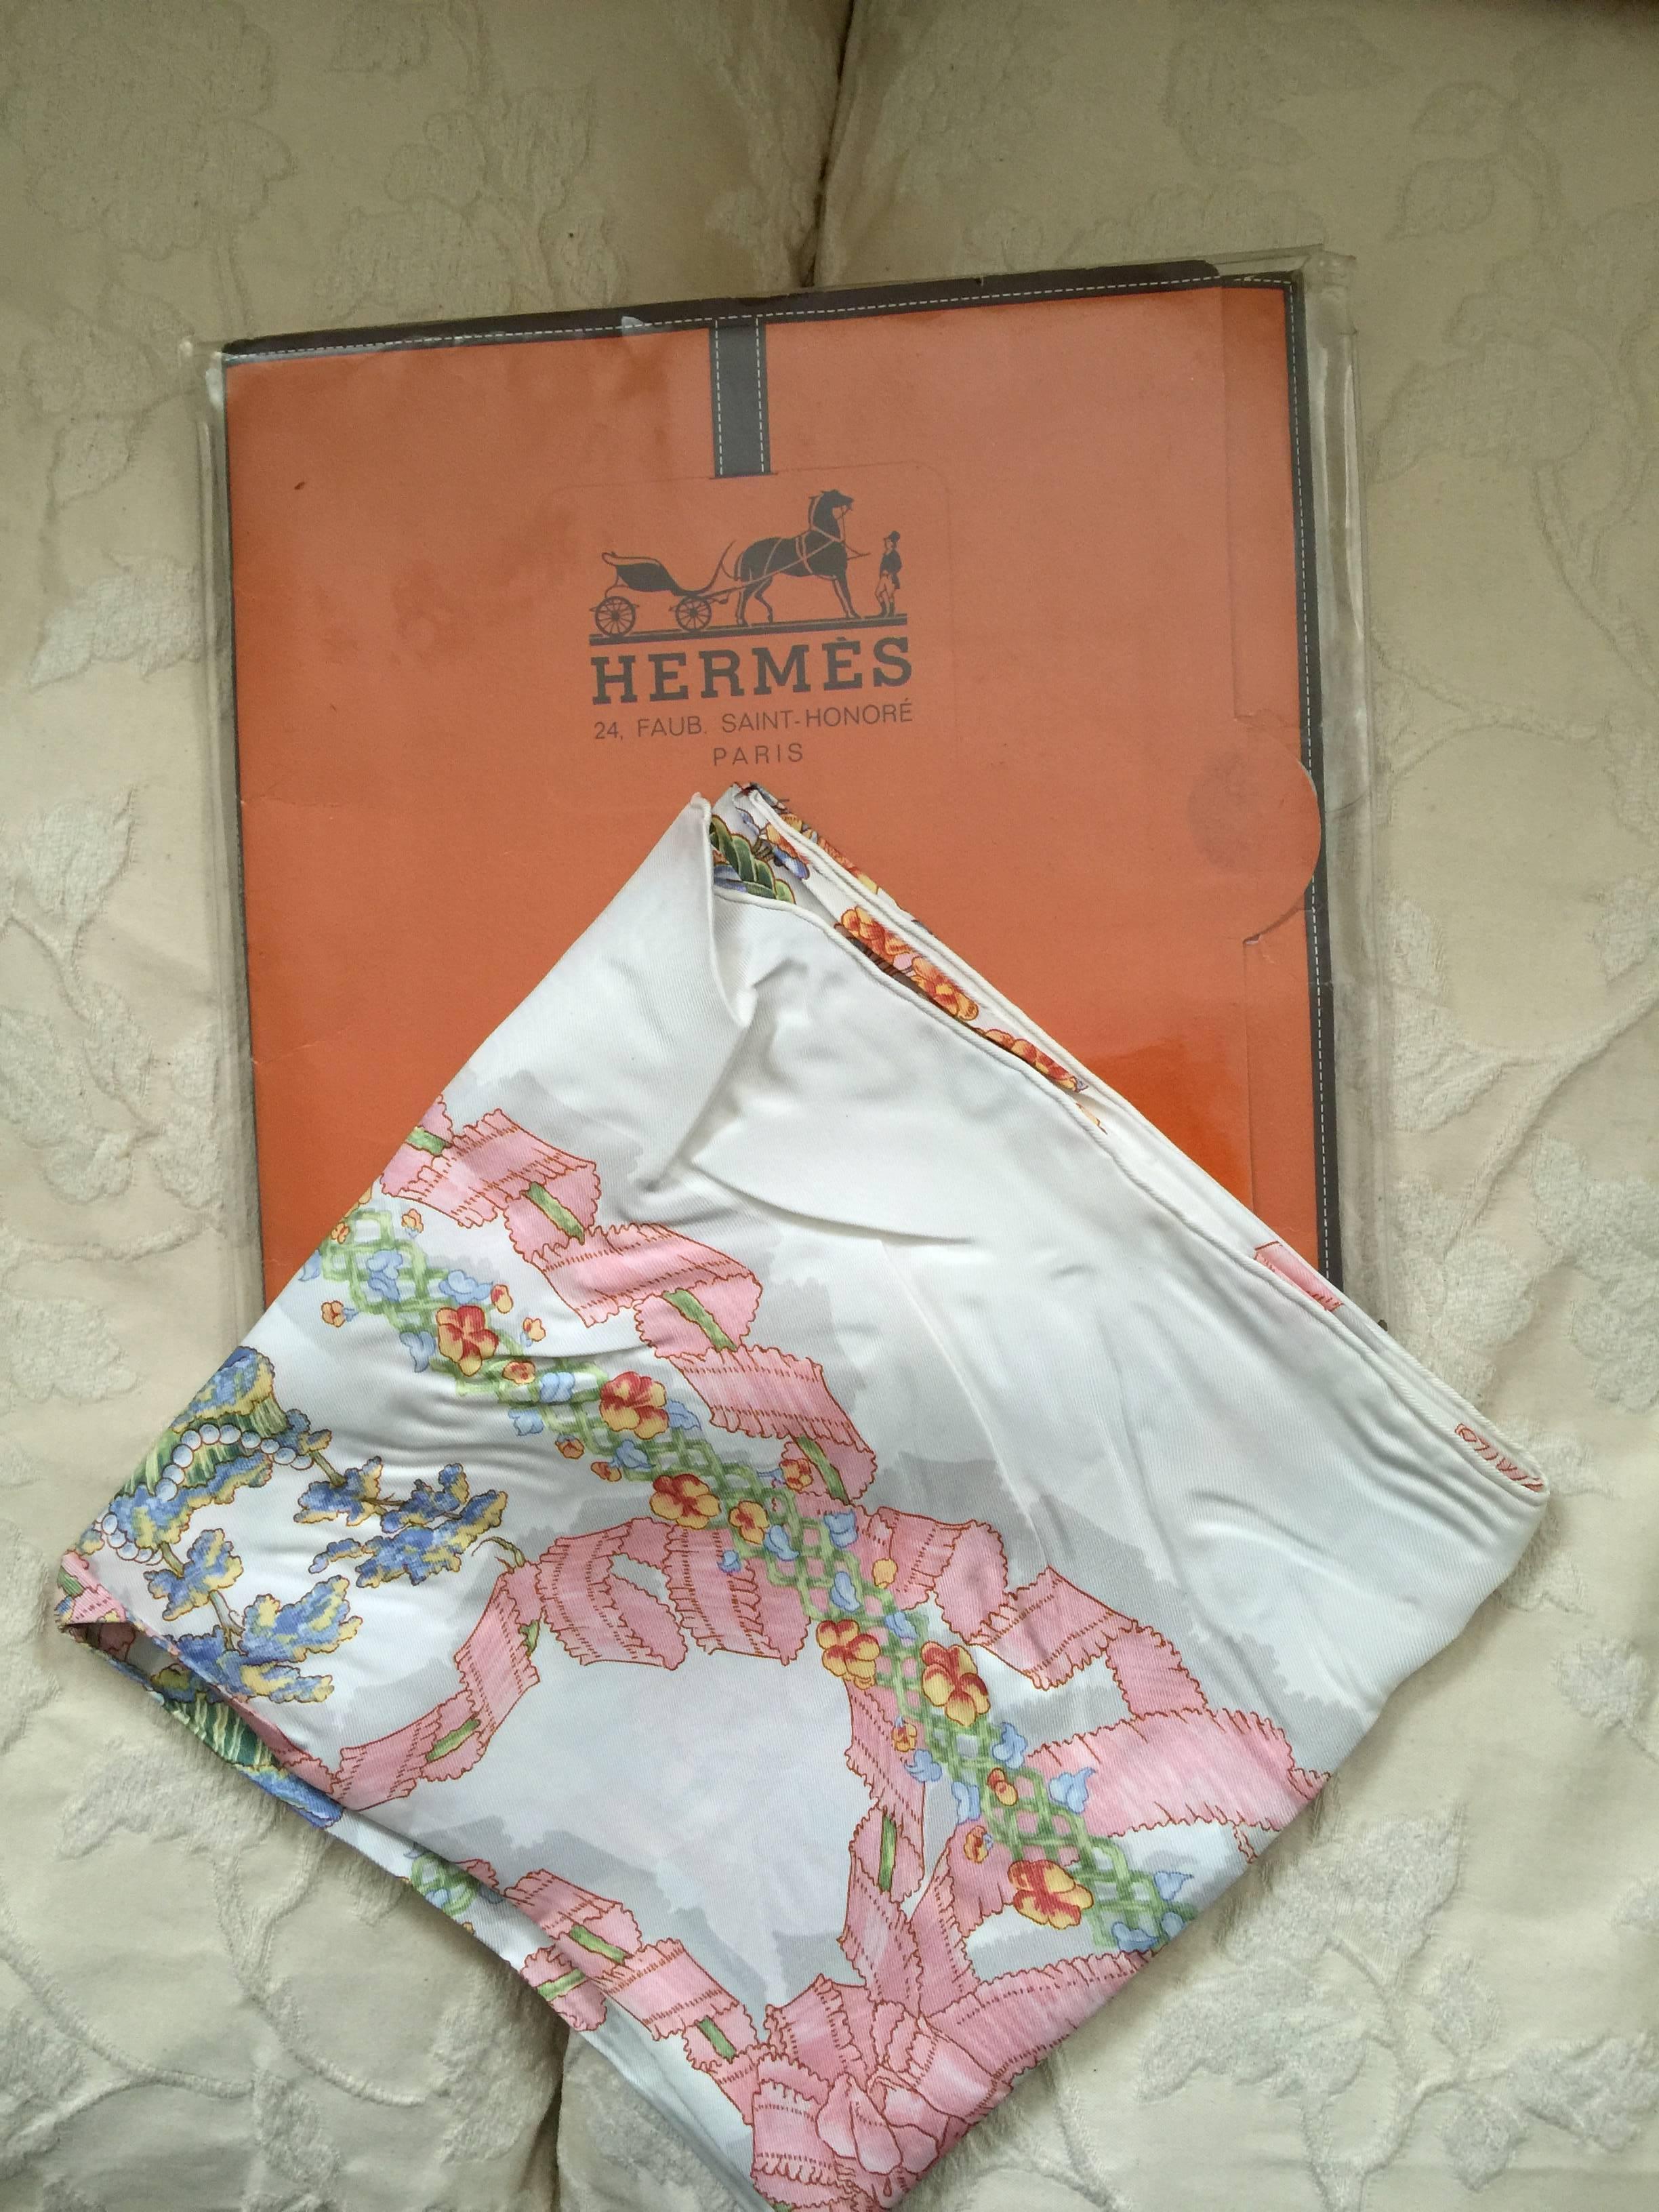 Pristine never worn in original package this Hermes scarf is elegant and delicate.
